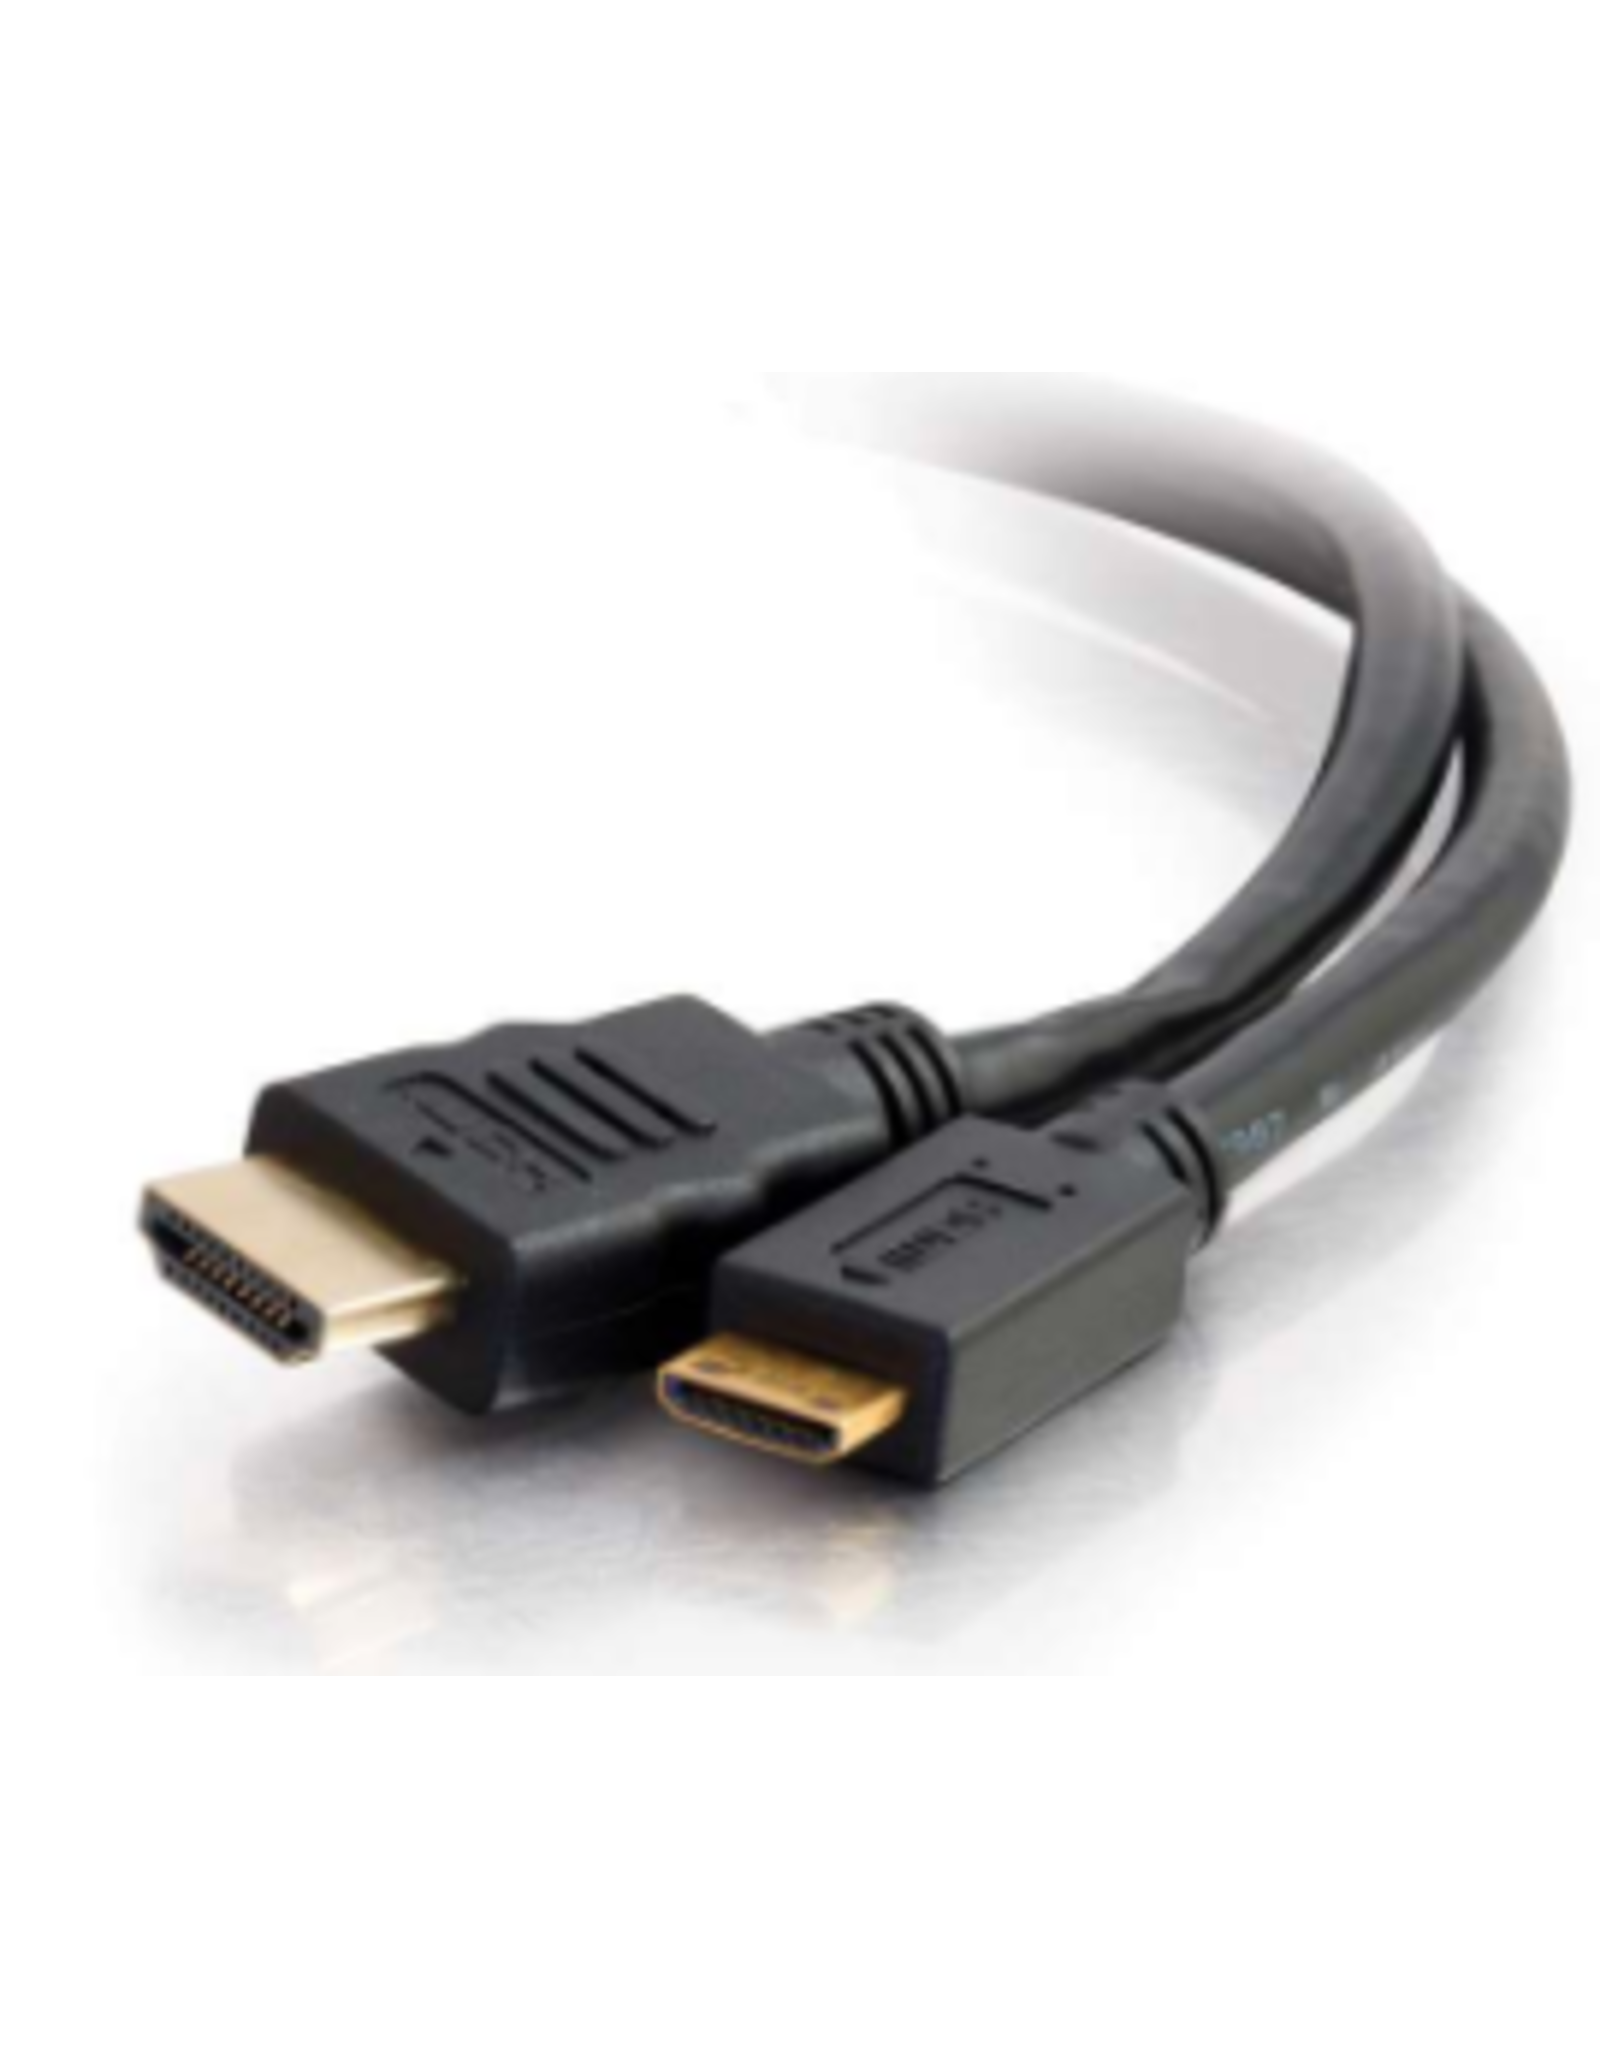 C2G HIGH SPEED HDMI TO HDMI MINI CABLE W